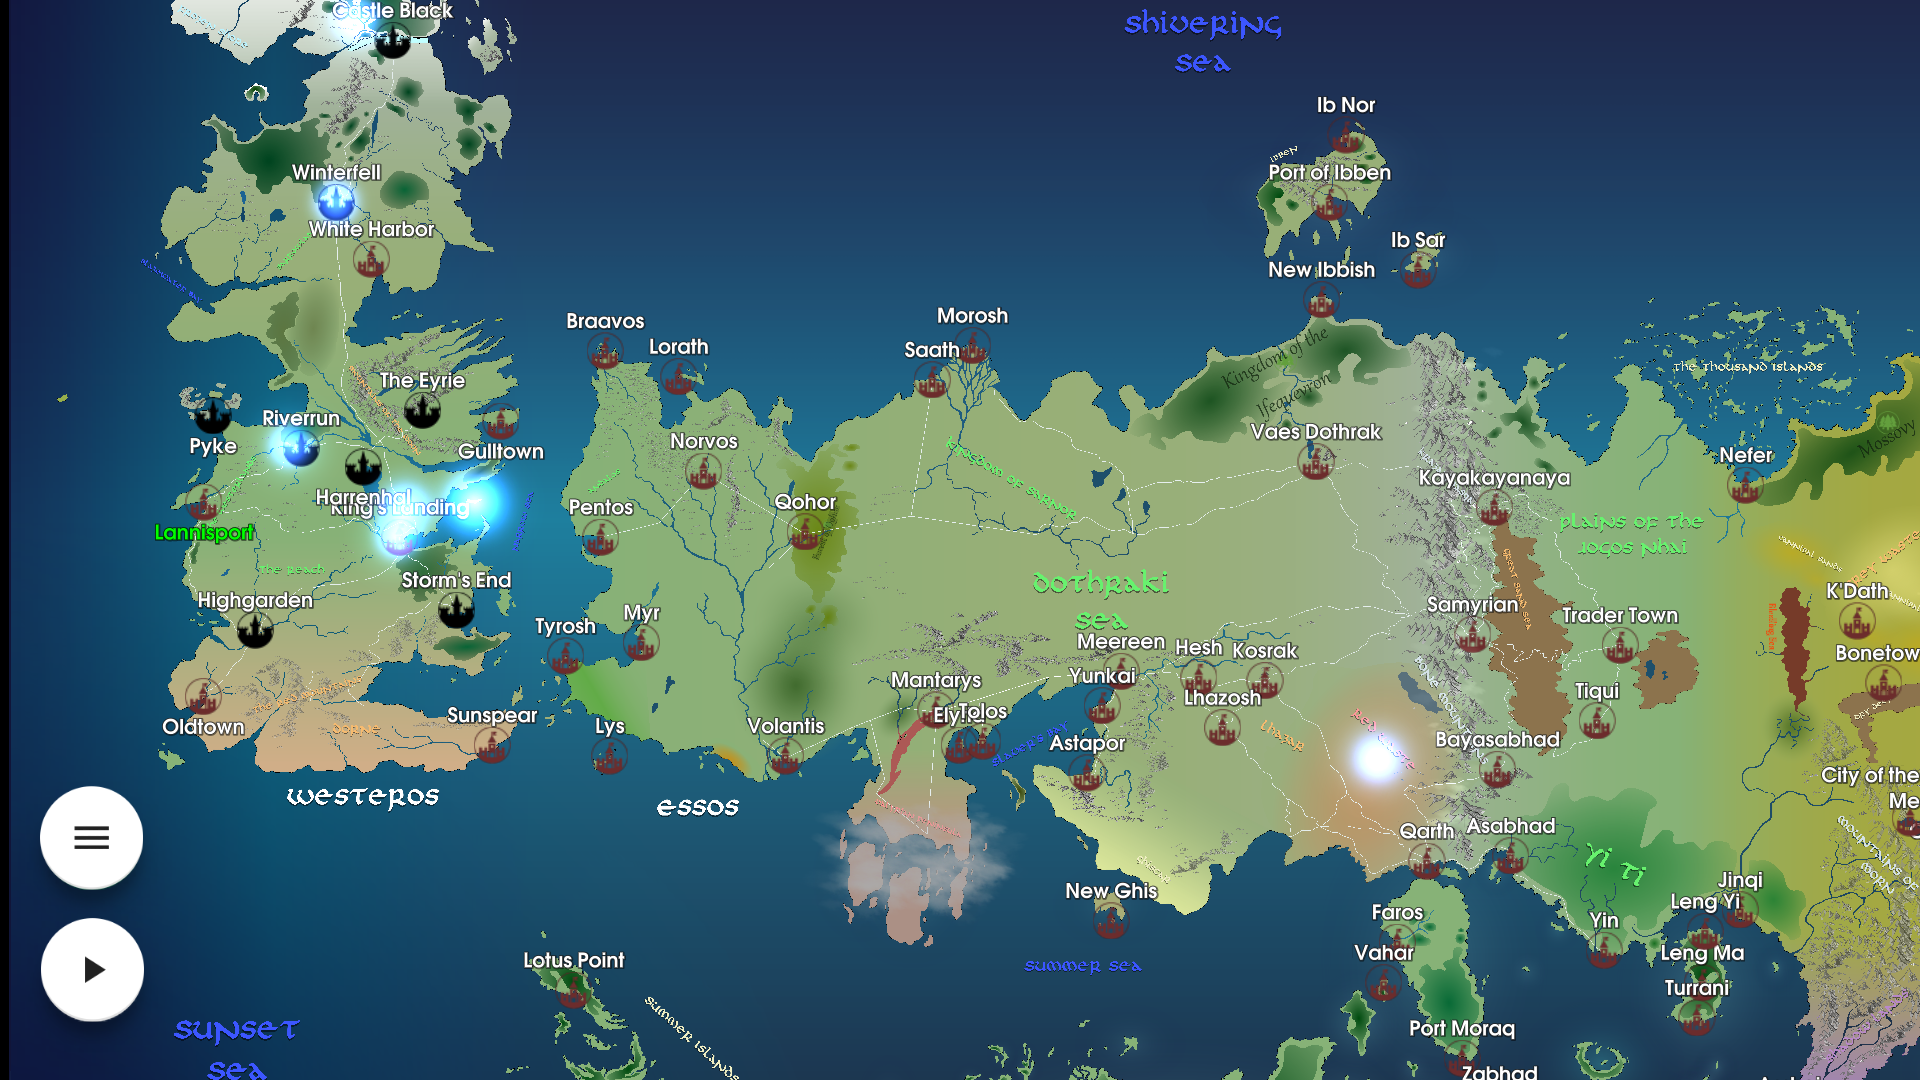 game of thrones character travel map